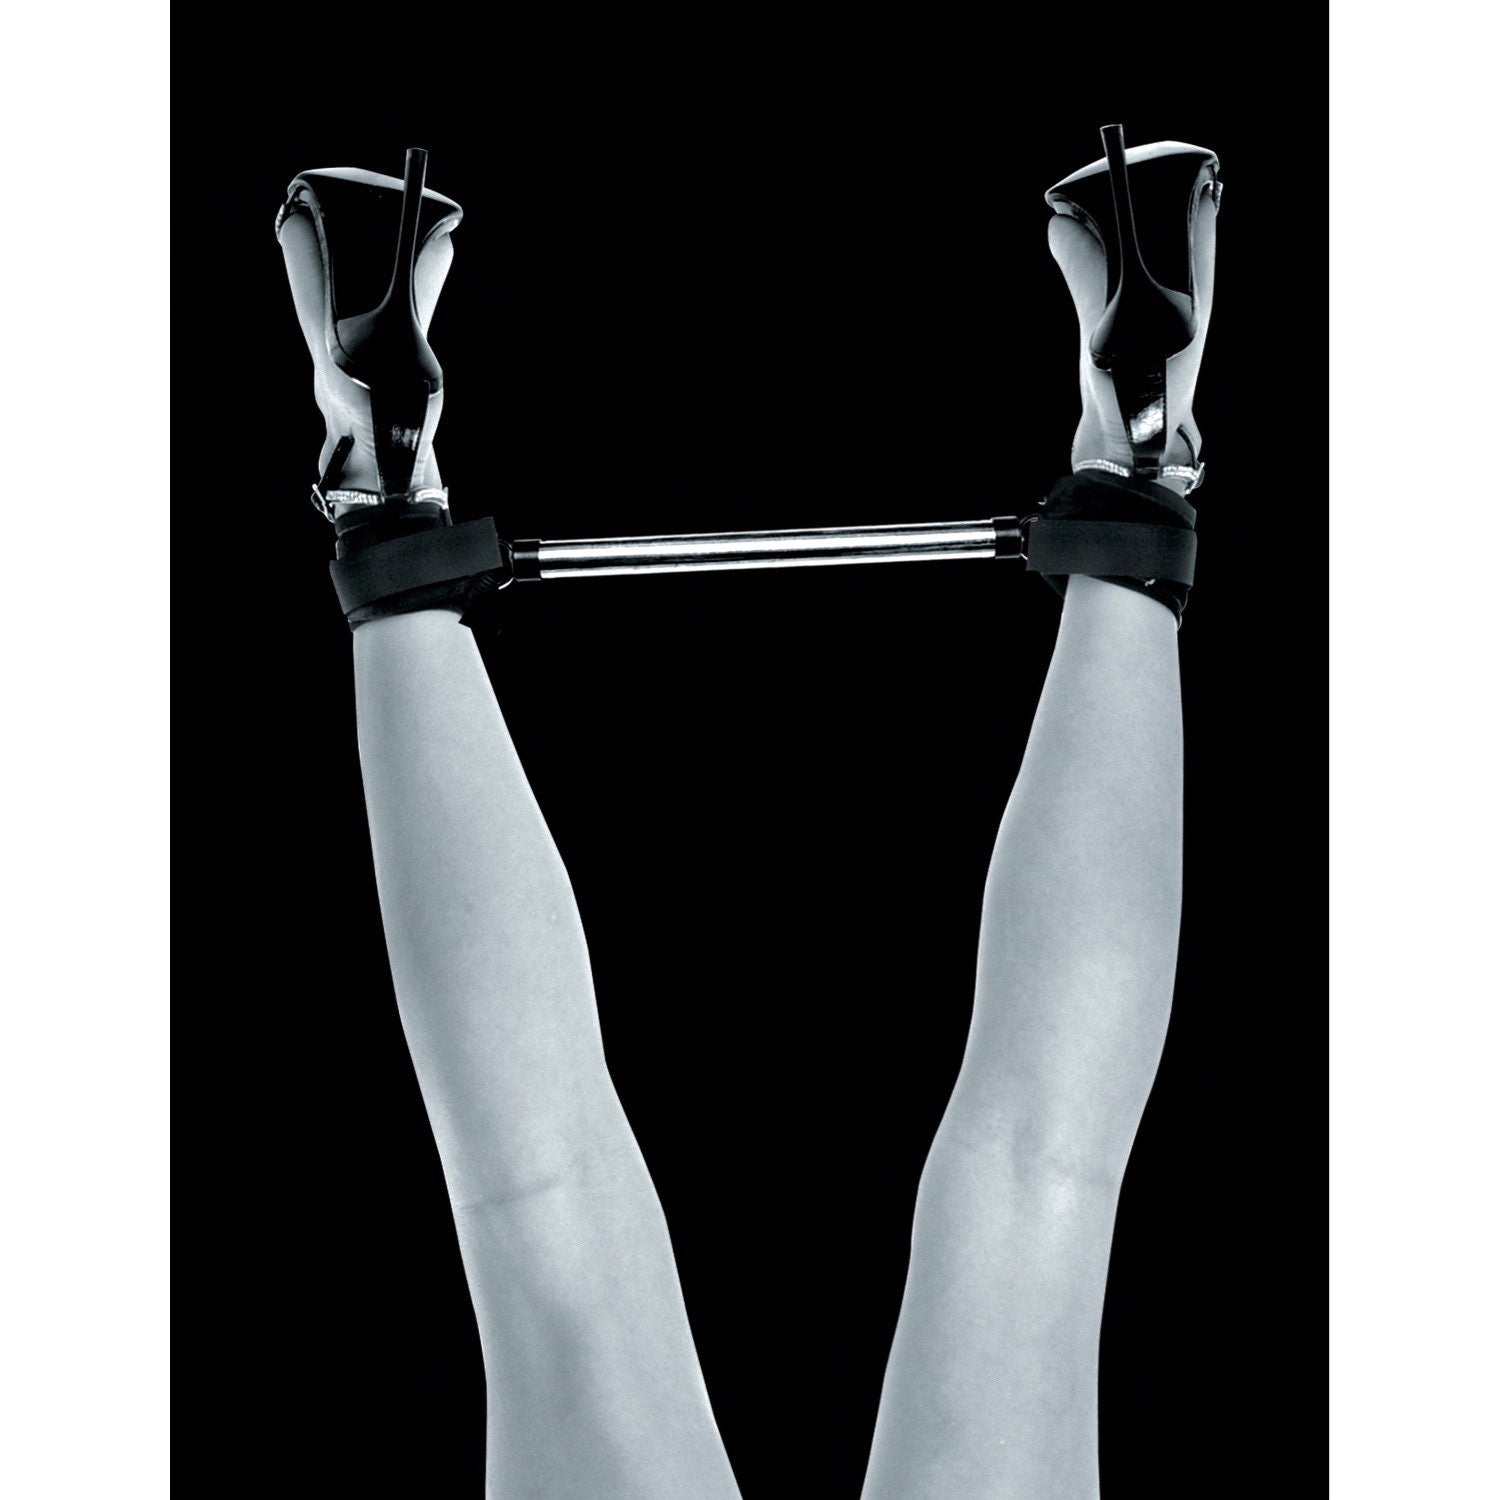 Fetish Fantasy Series Limited Edition Spreader Bar - Black Restraints by Pipedream